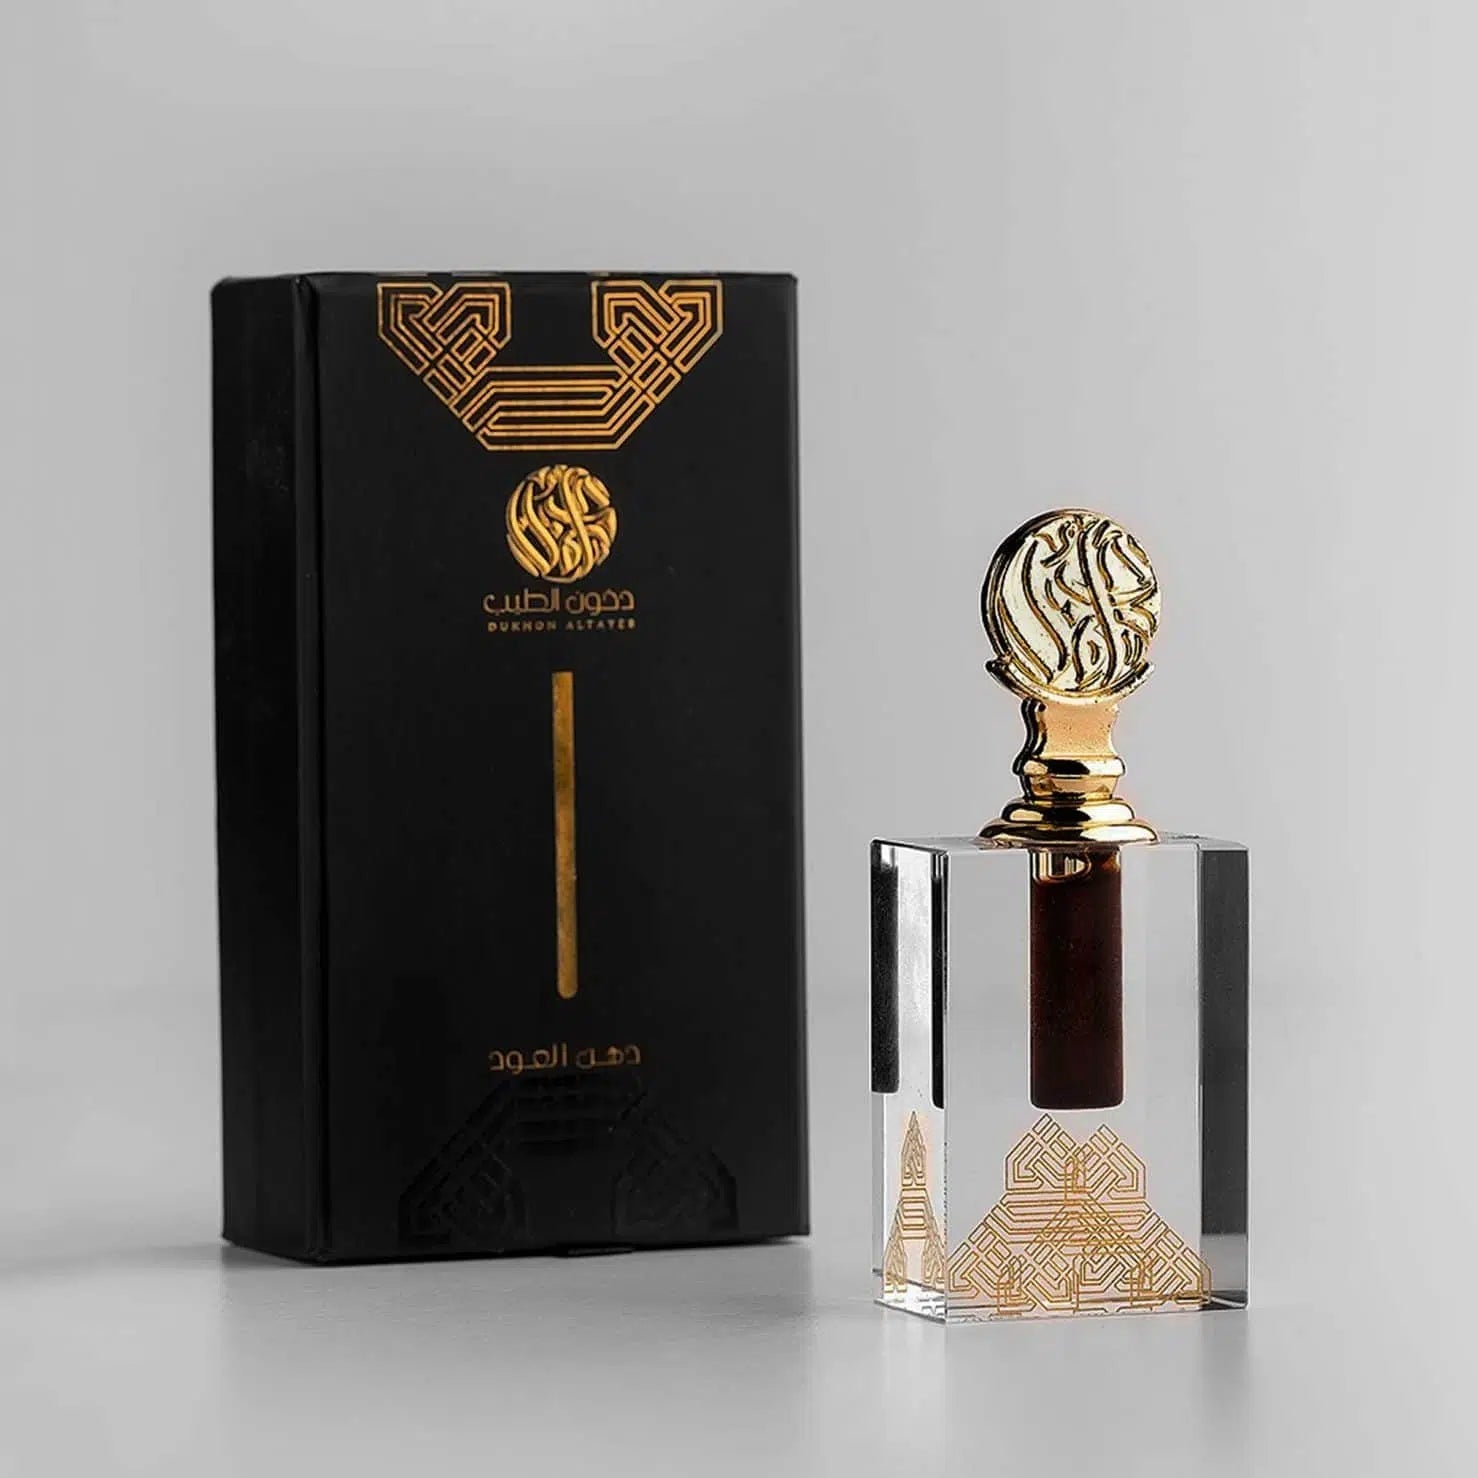 A special blend of Oud oil